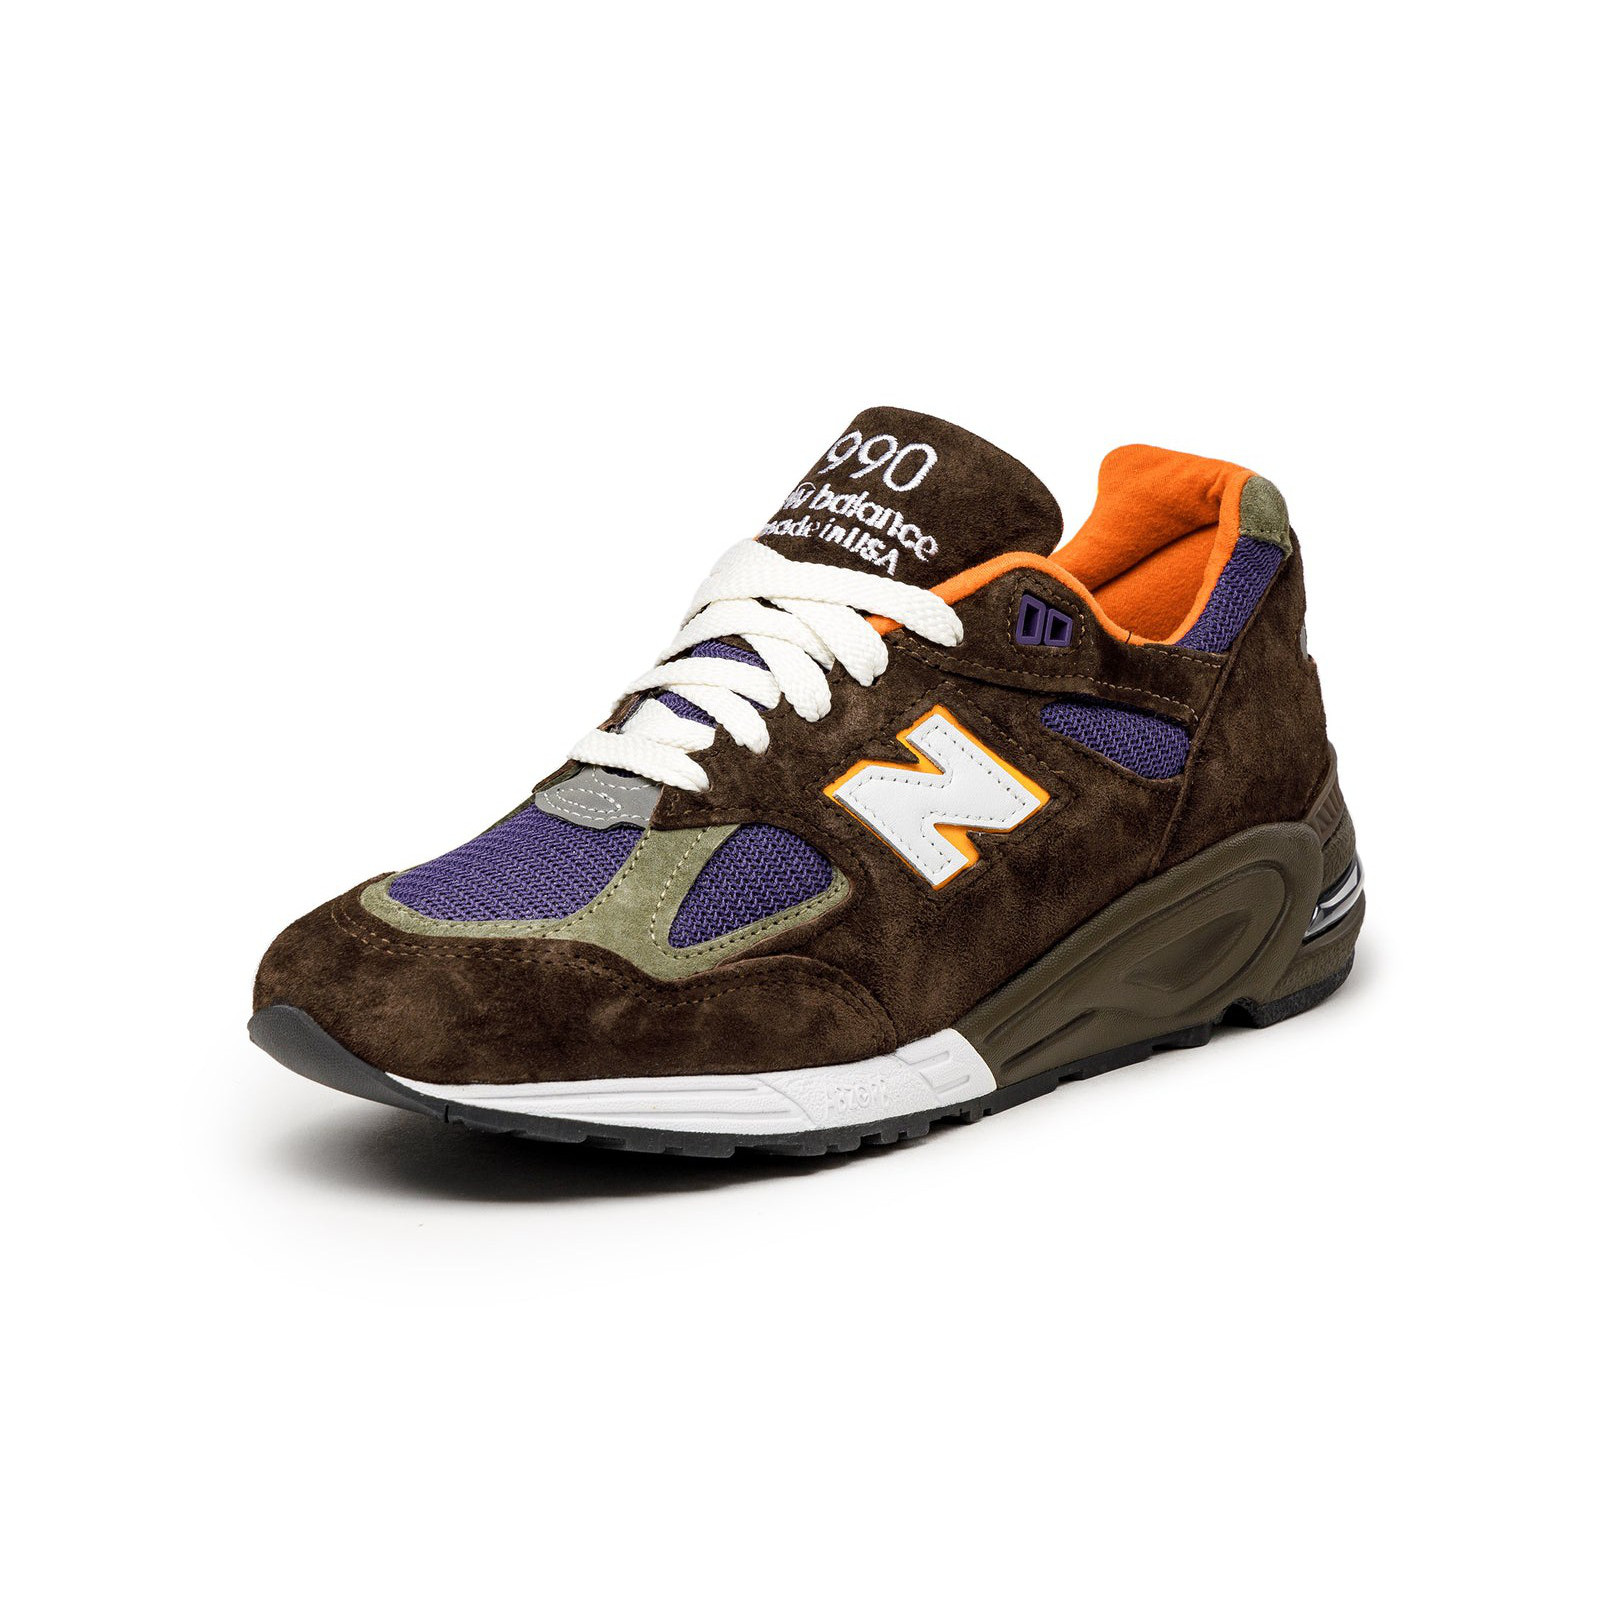 New Balance M990BR2
Made in USA
 Brown / Grey